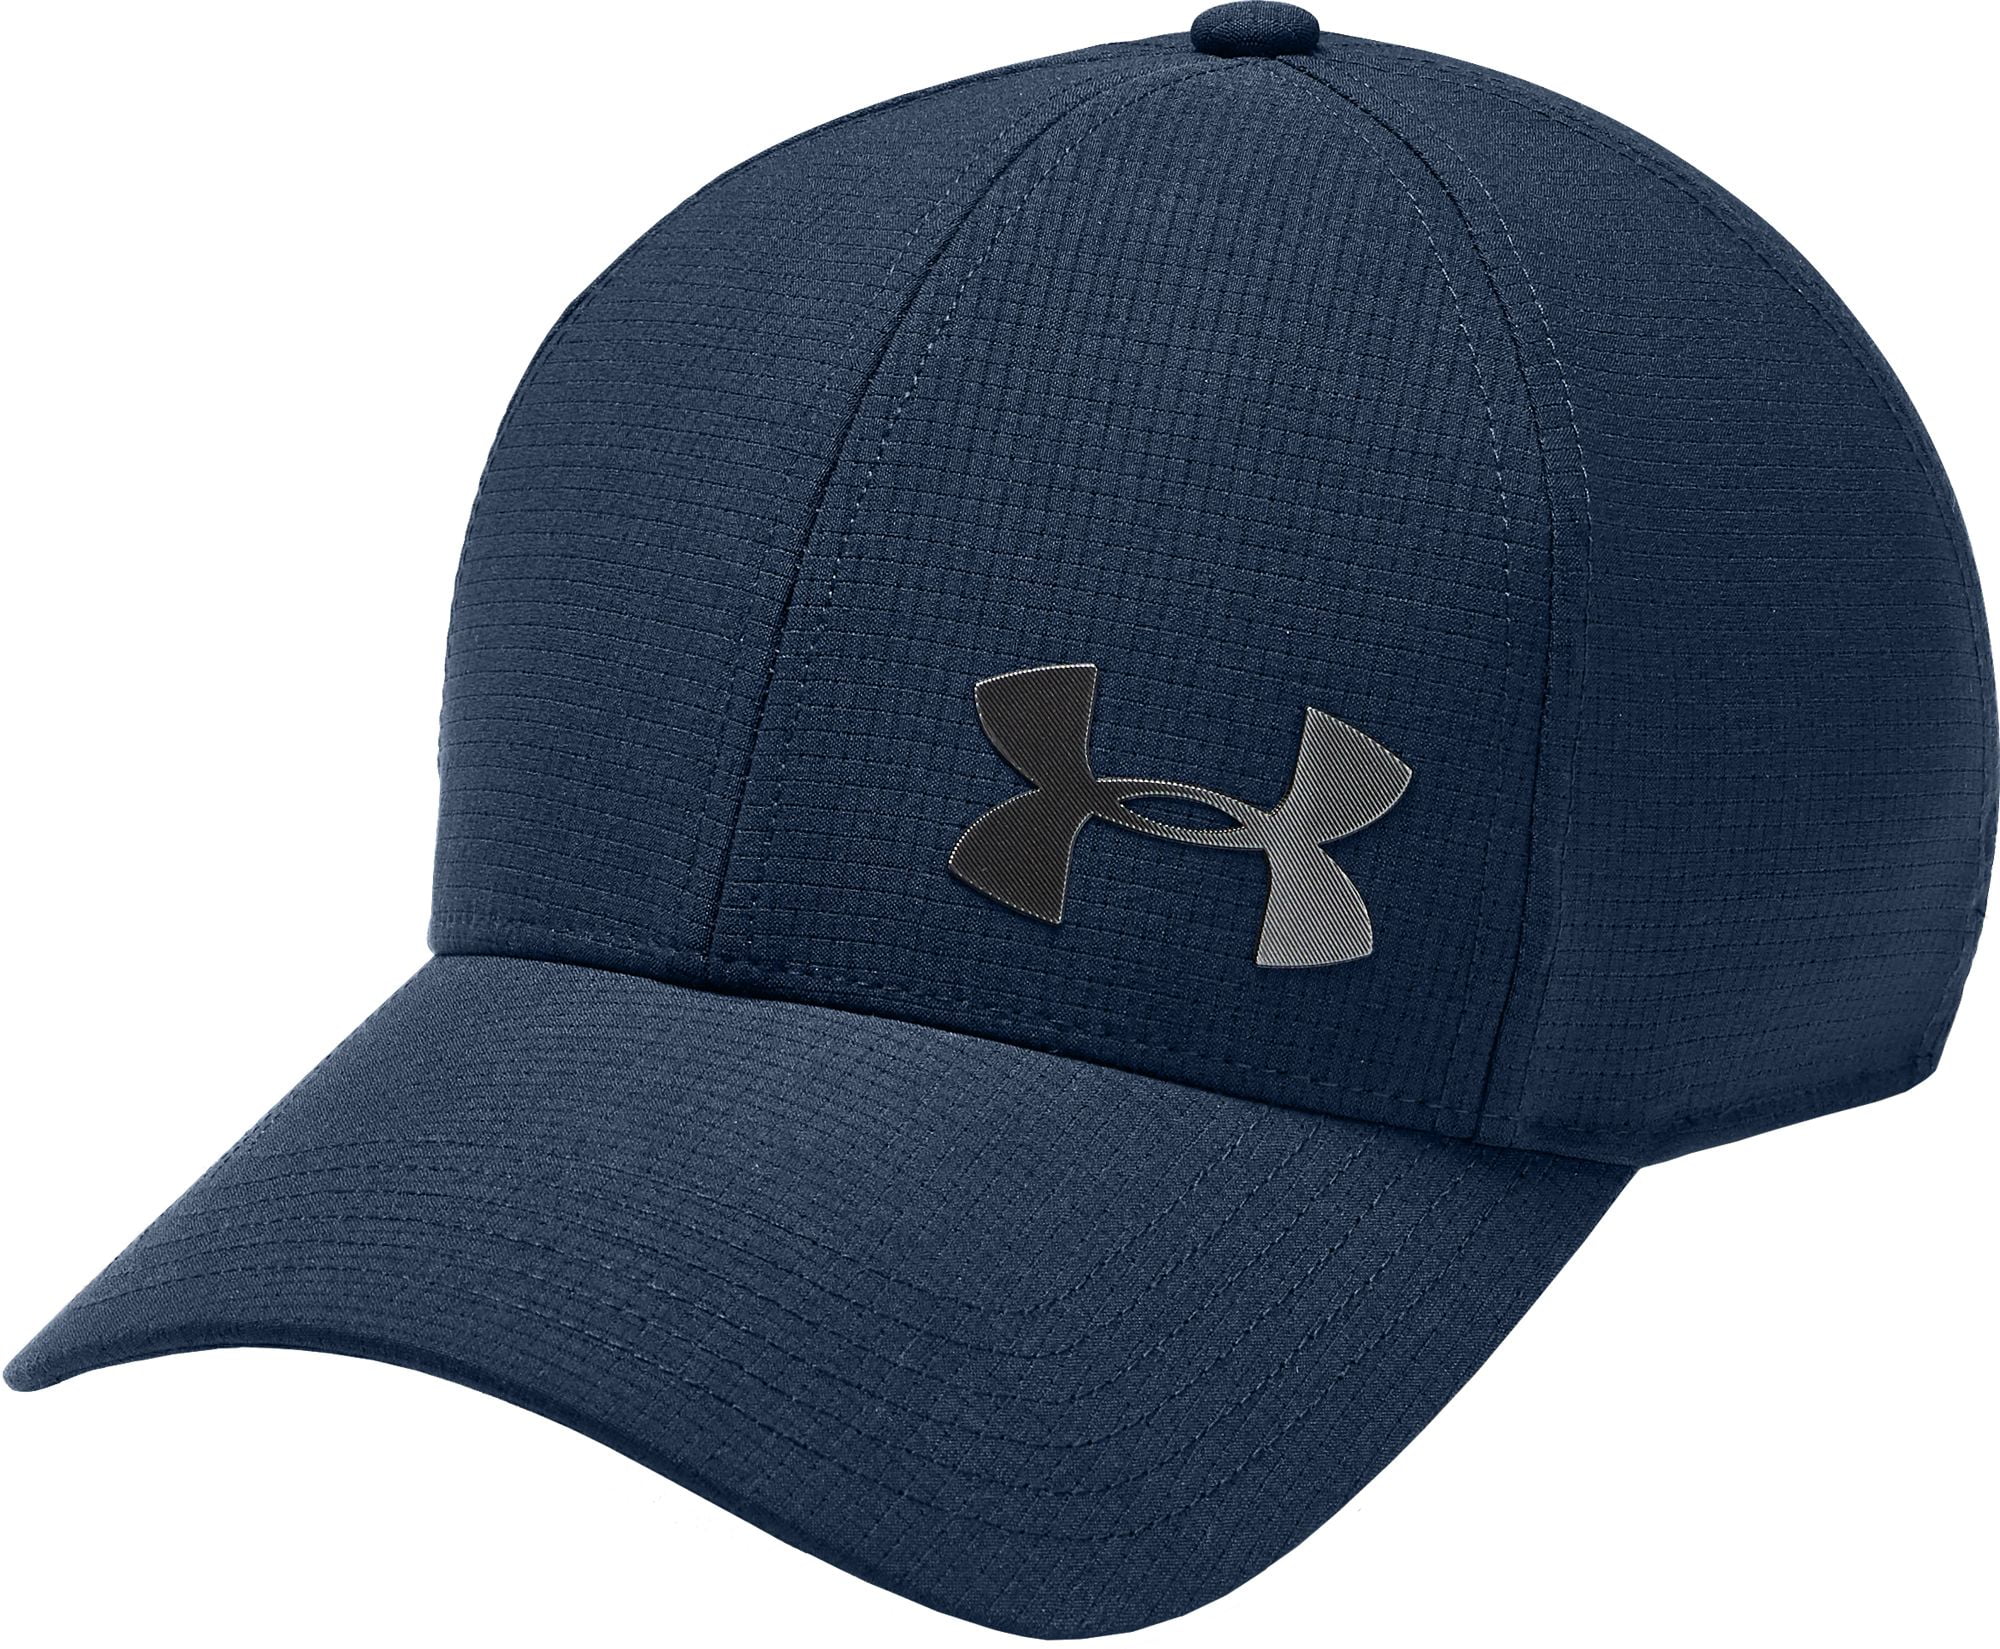 Under Armour Blitzing 3.0 Mens Cap White Gym Running Training Sports Workout Hat 